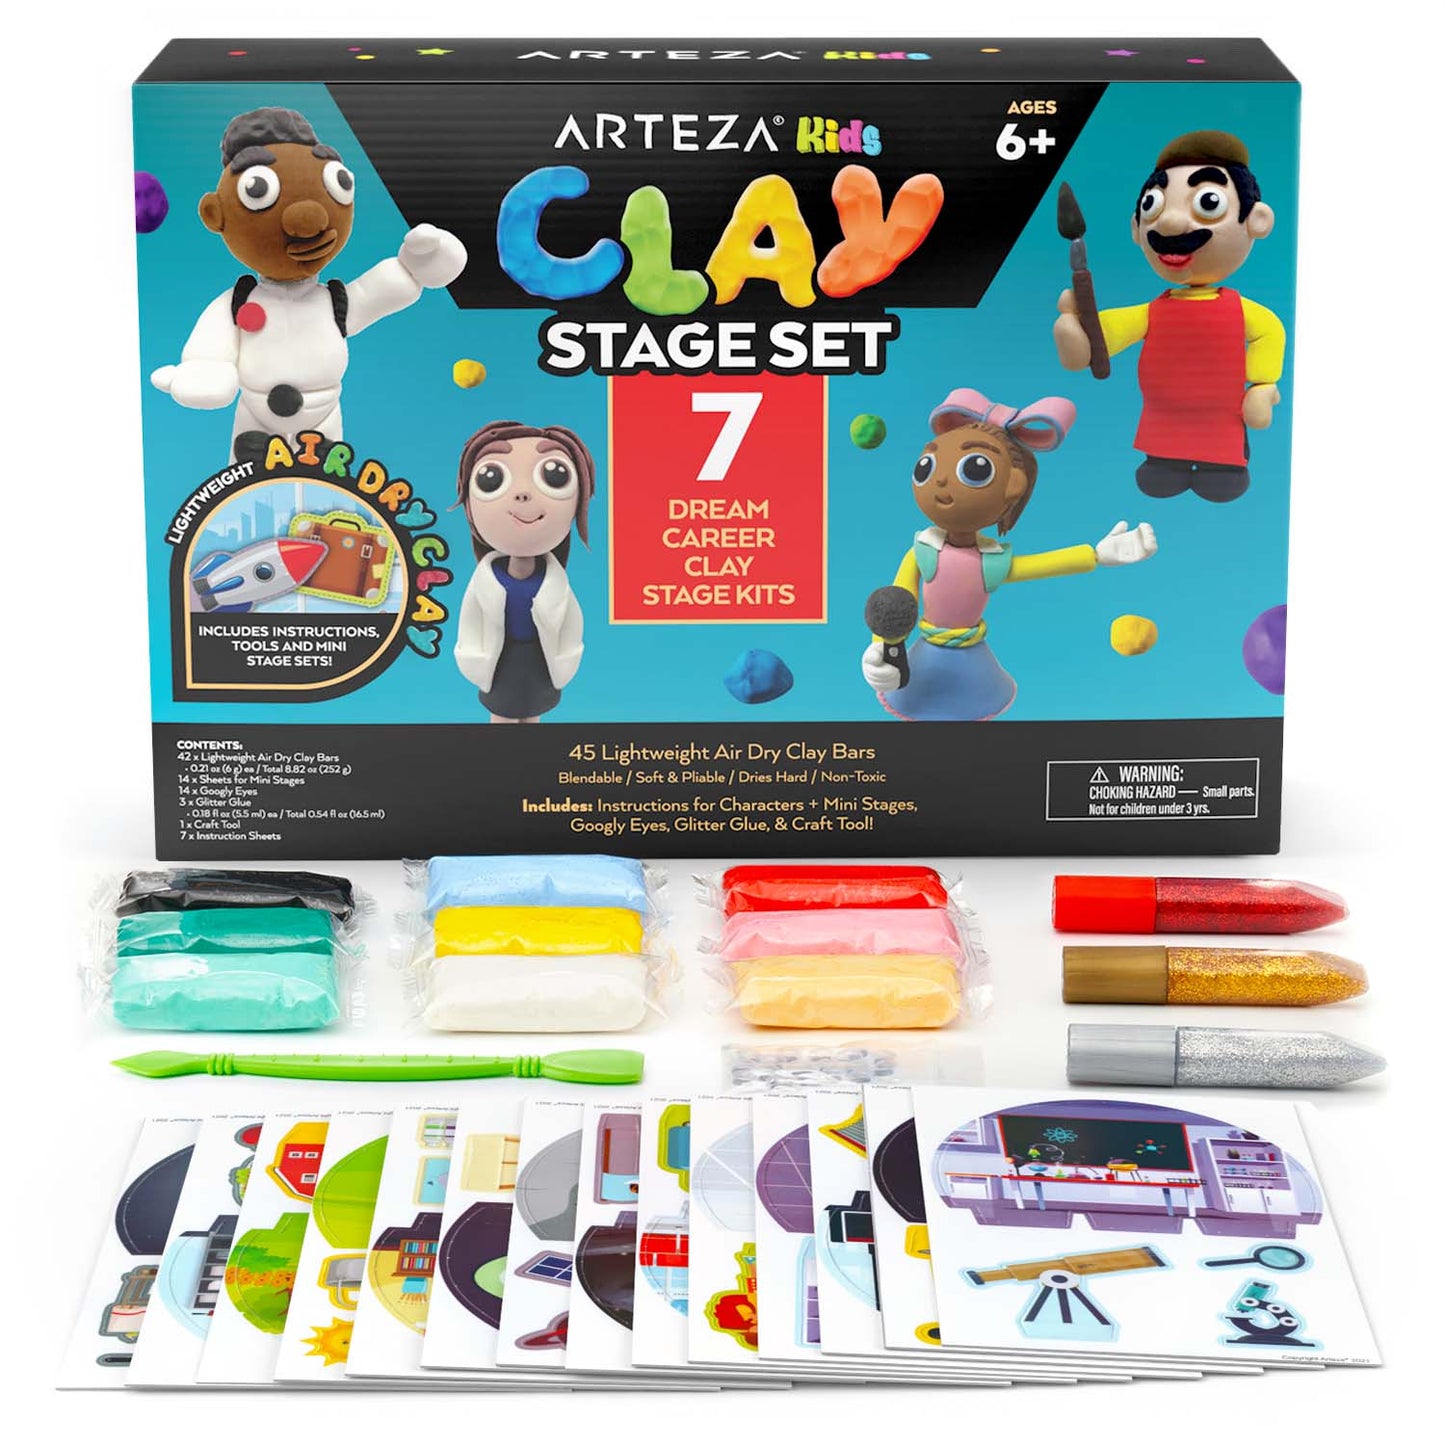  ARTEZA Vision Board Kit, Experience Box  Creative Art & Craft  Set for Goal Setting, Party Kit for Group Activities, Business Planning,  Personal Development, Art Supplies, Craft Supplies : Electronics